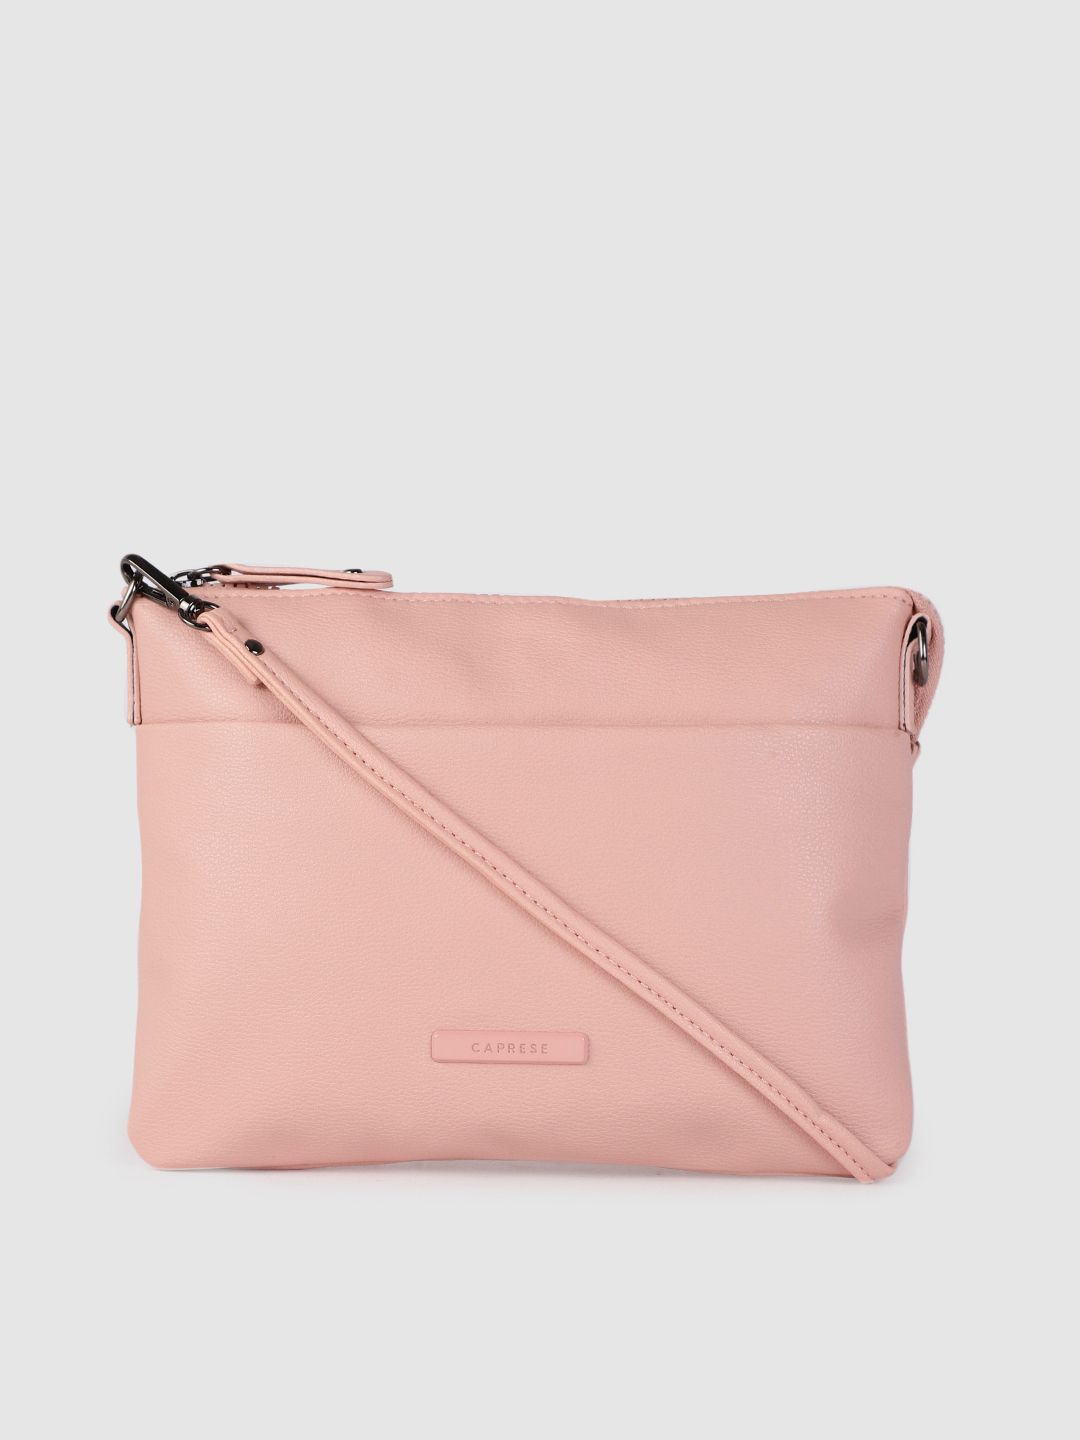 Caprese Pink Solid Sling Bag Price in India